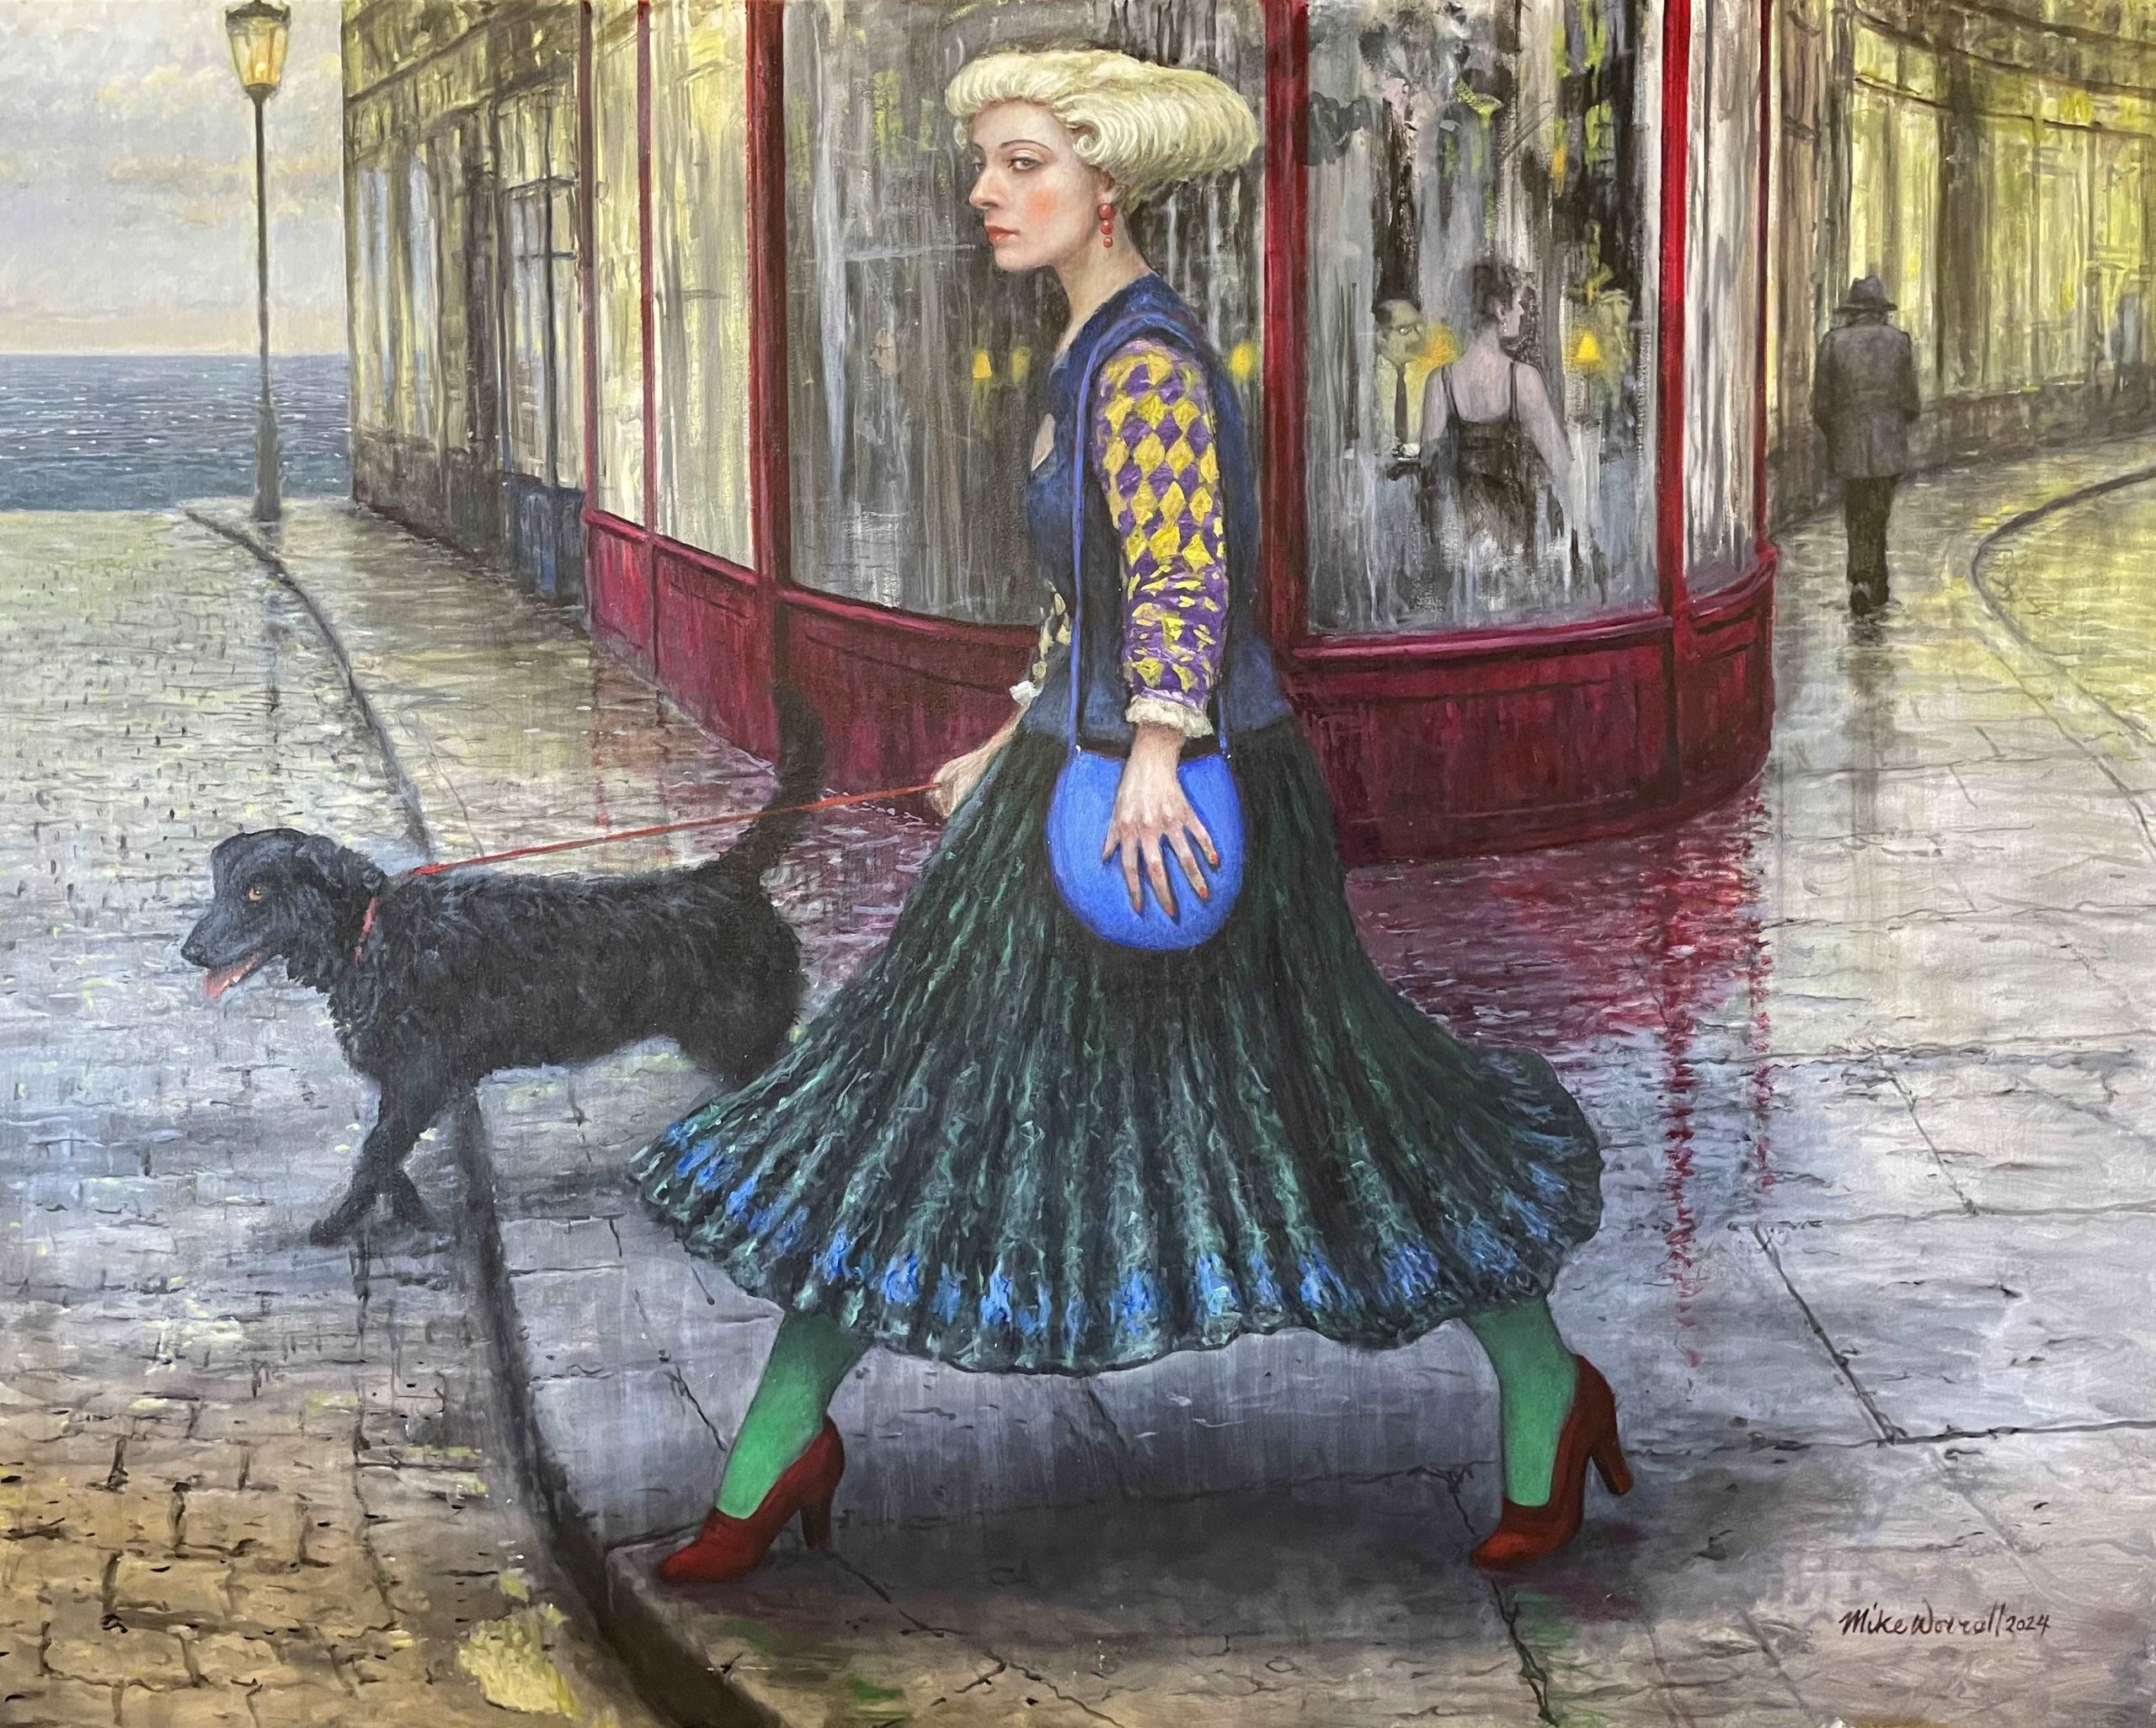 Mike Worrall 'Stepping Out' oil on linen 122 x 152cm $25,000